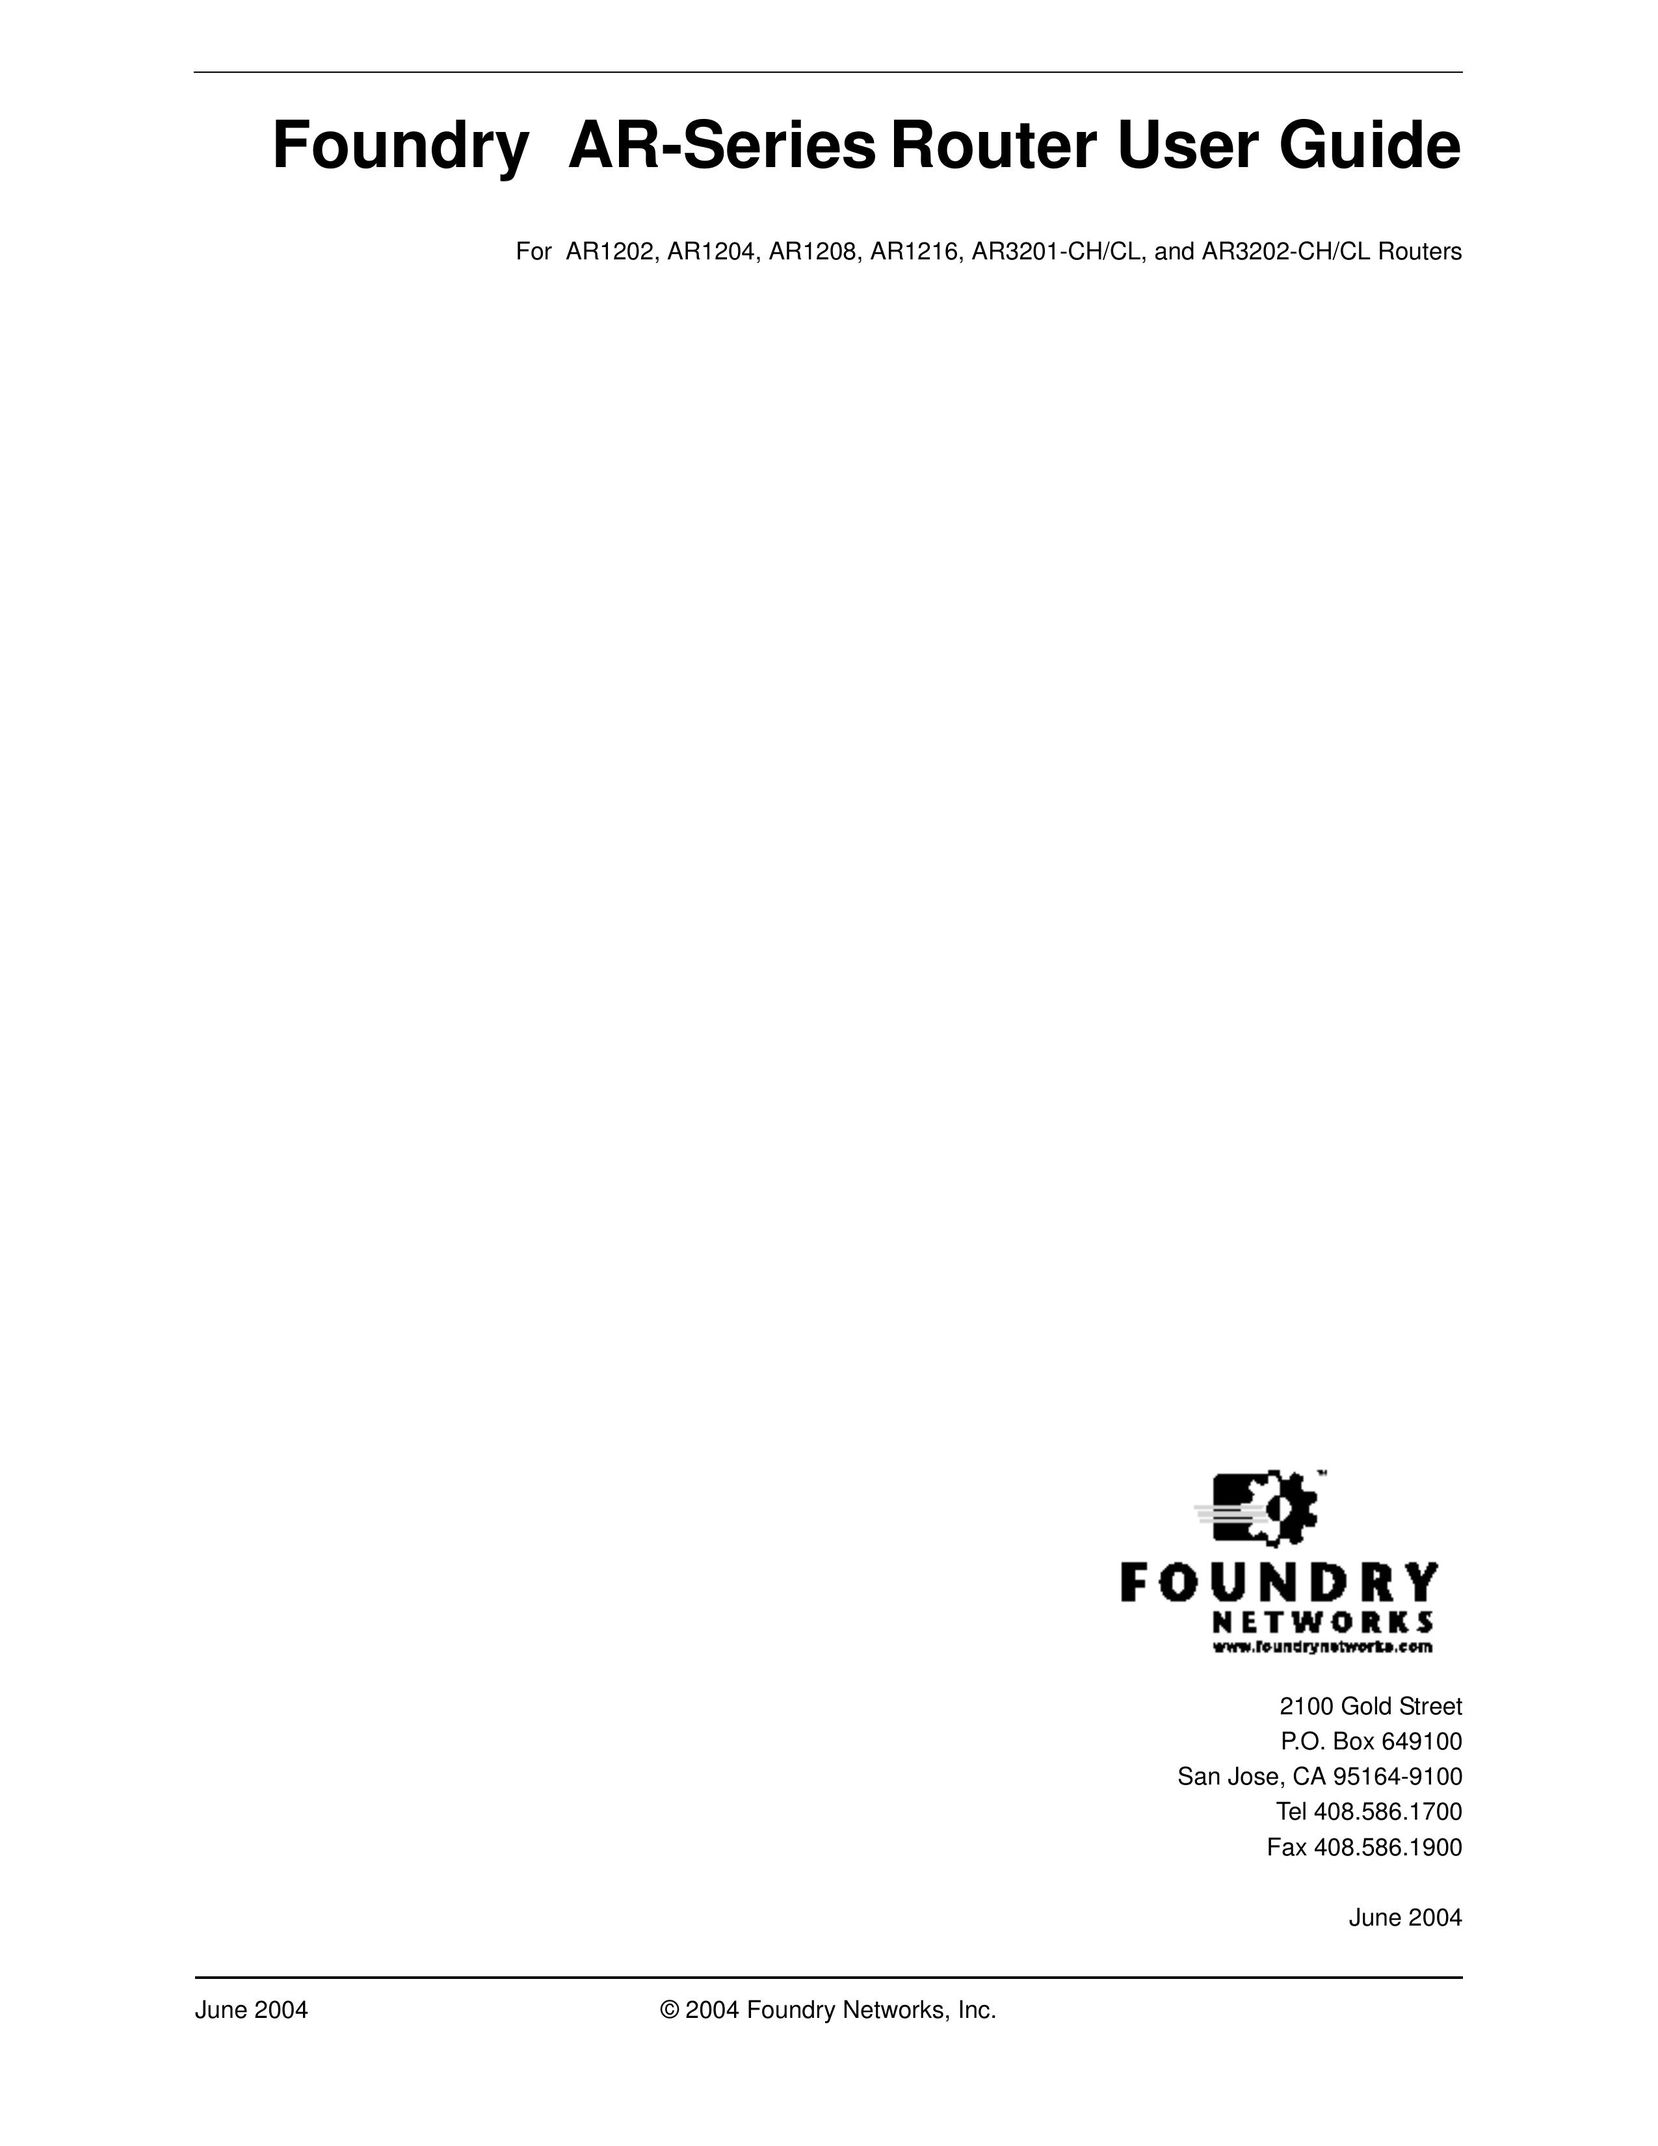 Foundry Networks AR1204 Network Router User Manual